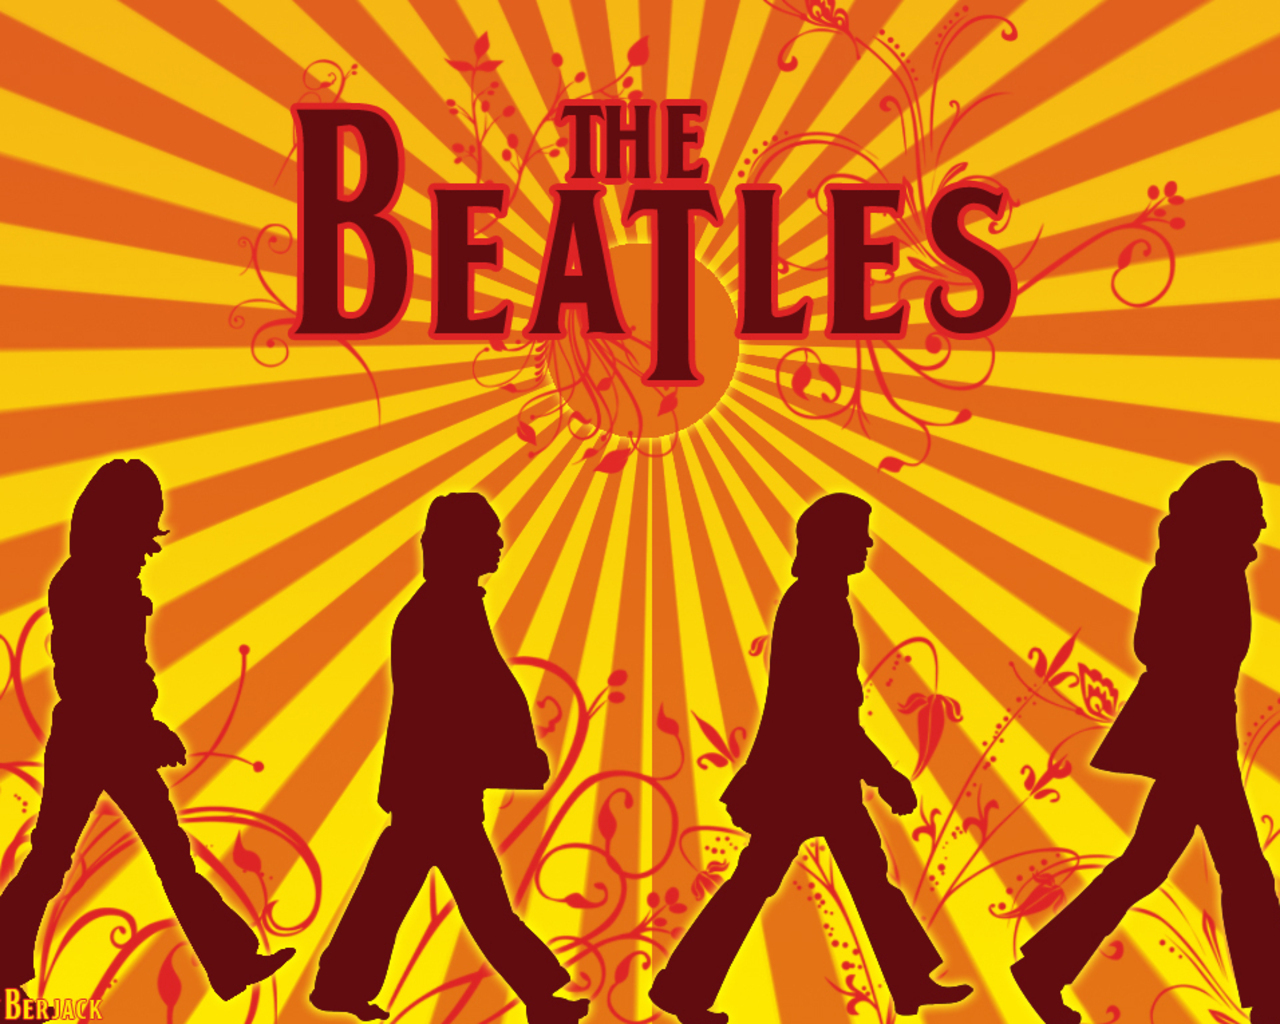 Classic Rock images the Beatles Wallpaper HD wallpaper and